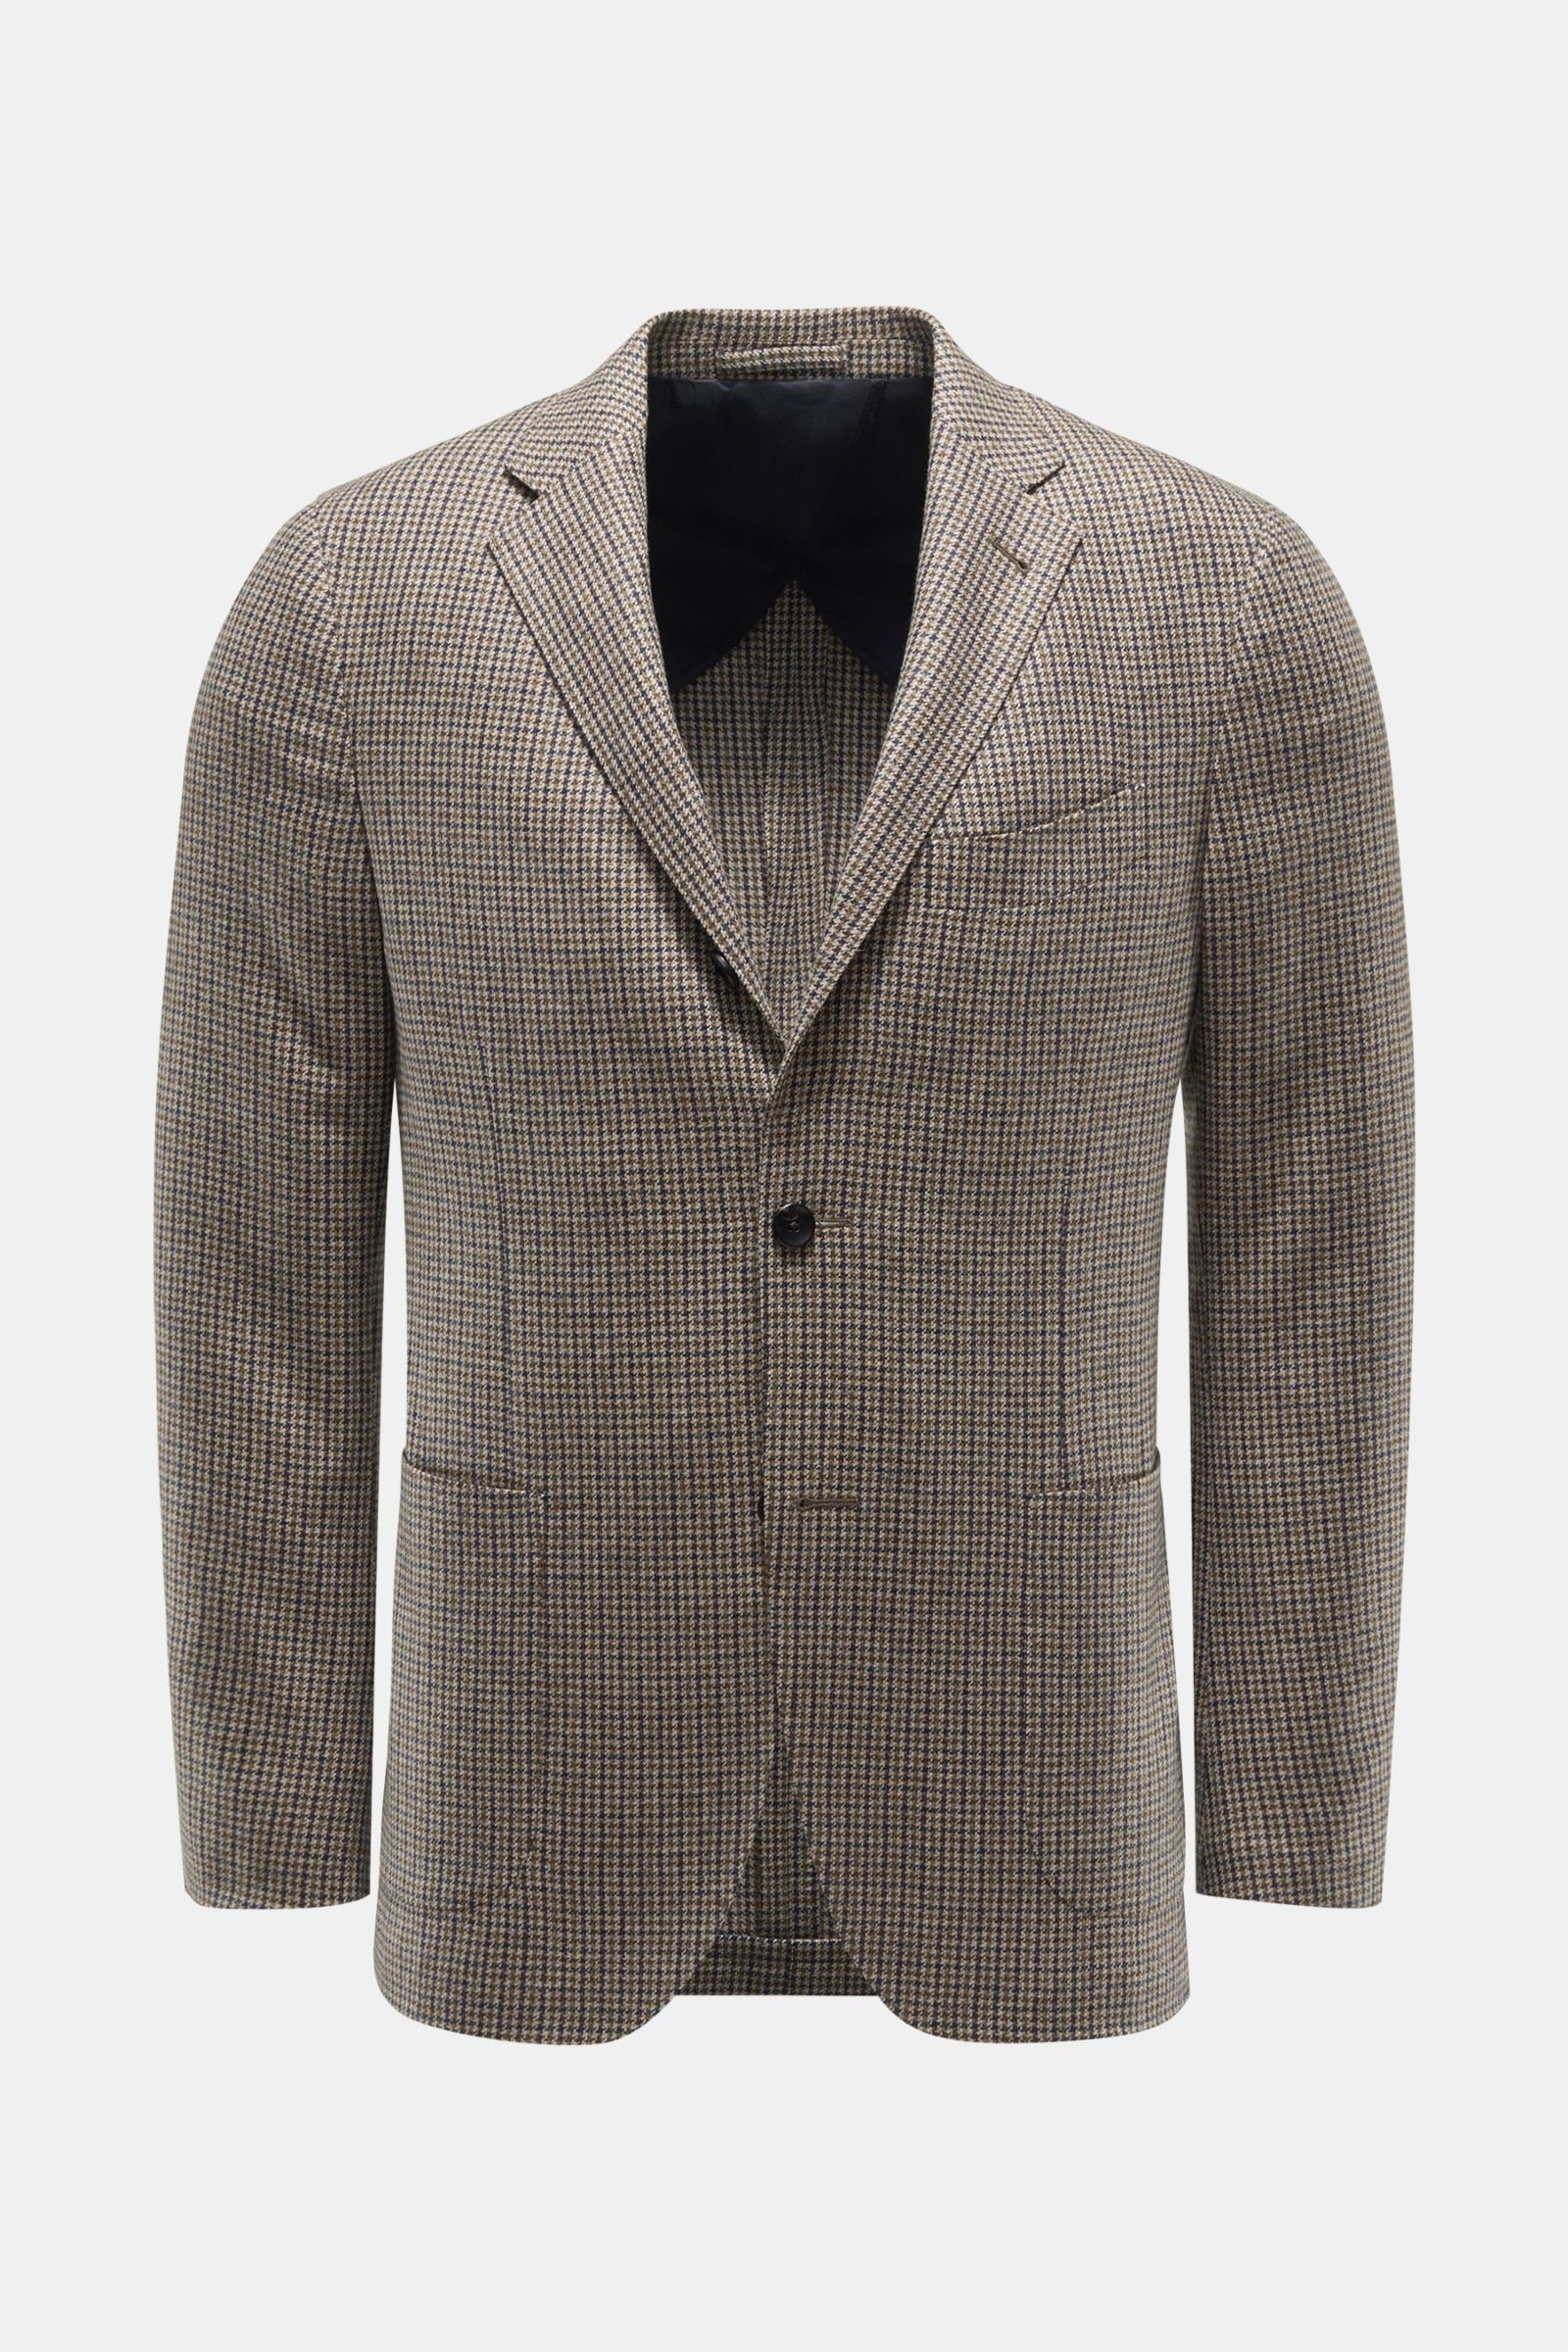 Smart-casual jacket beige/navy checked